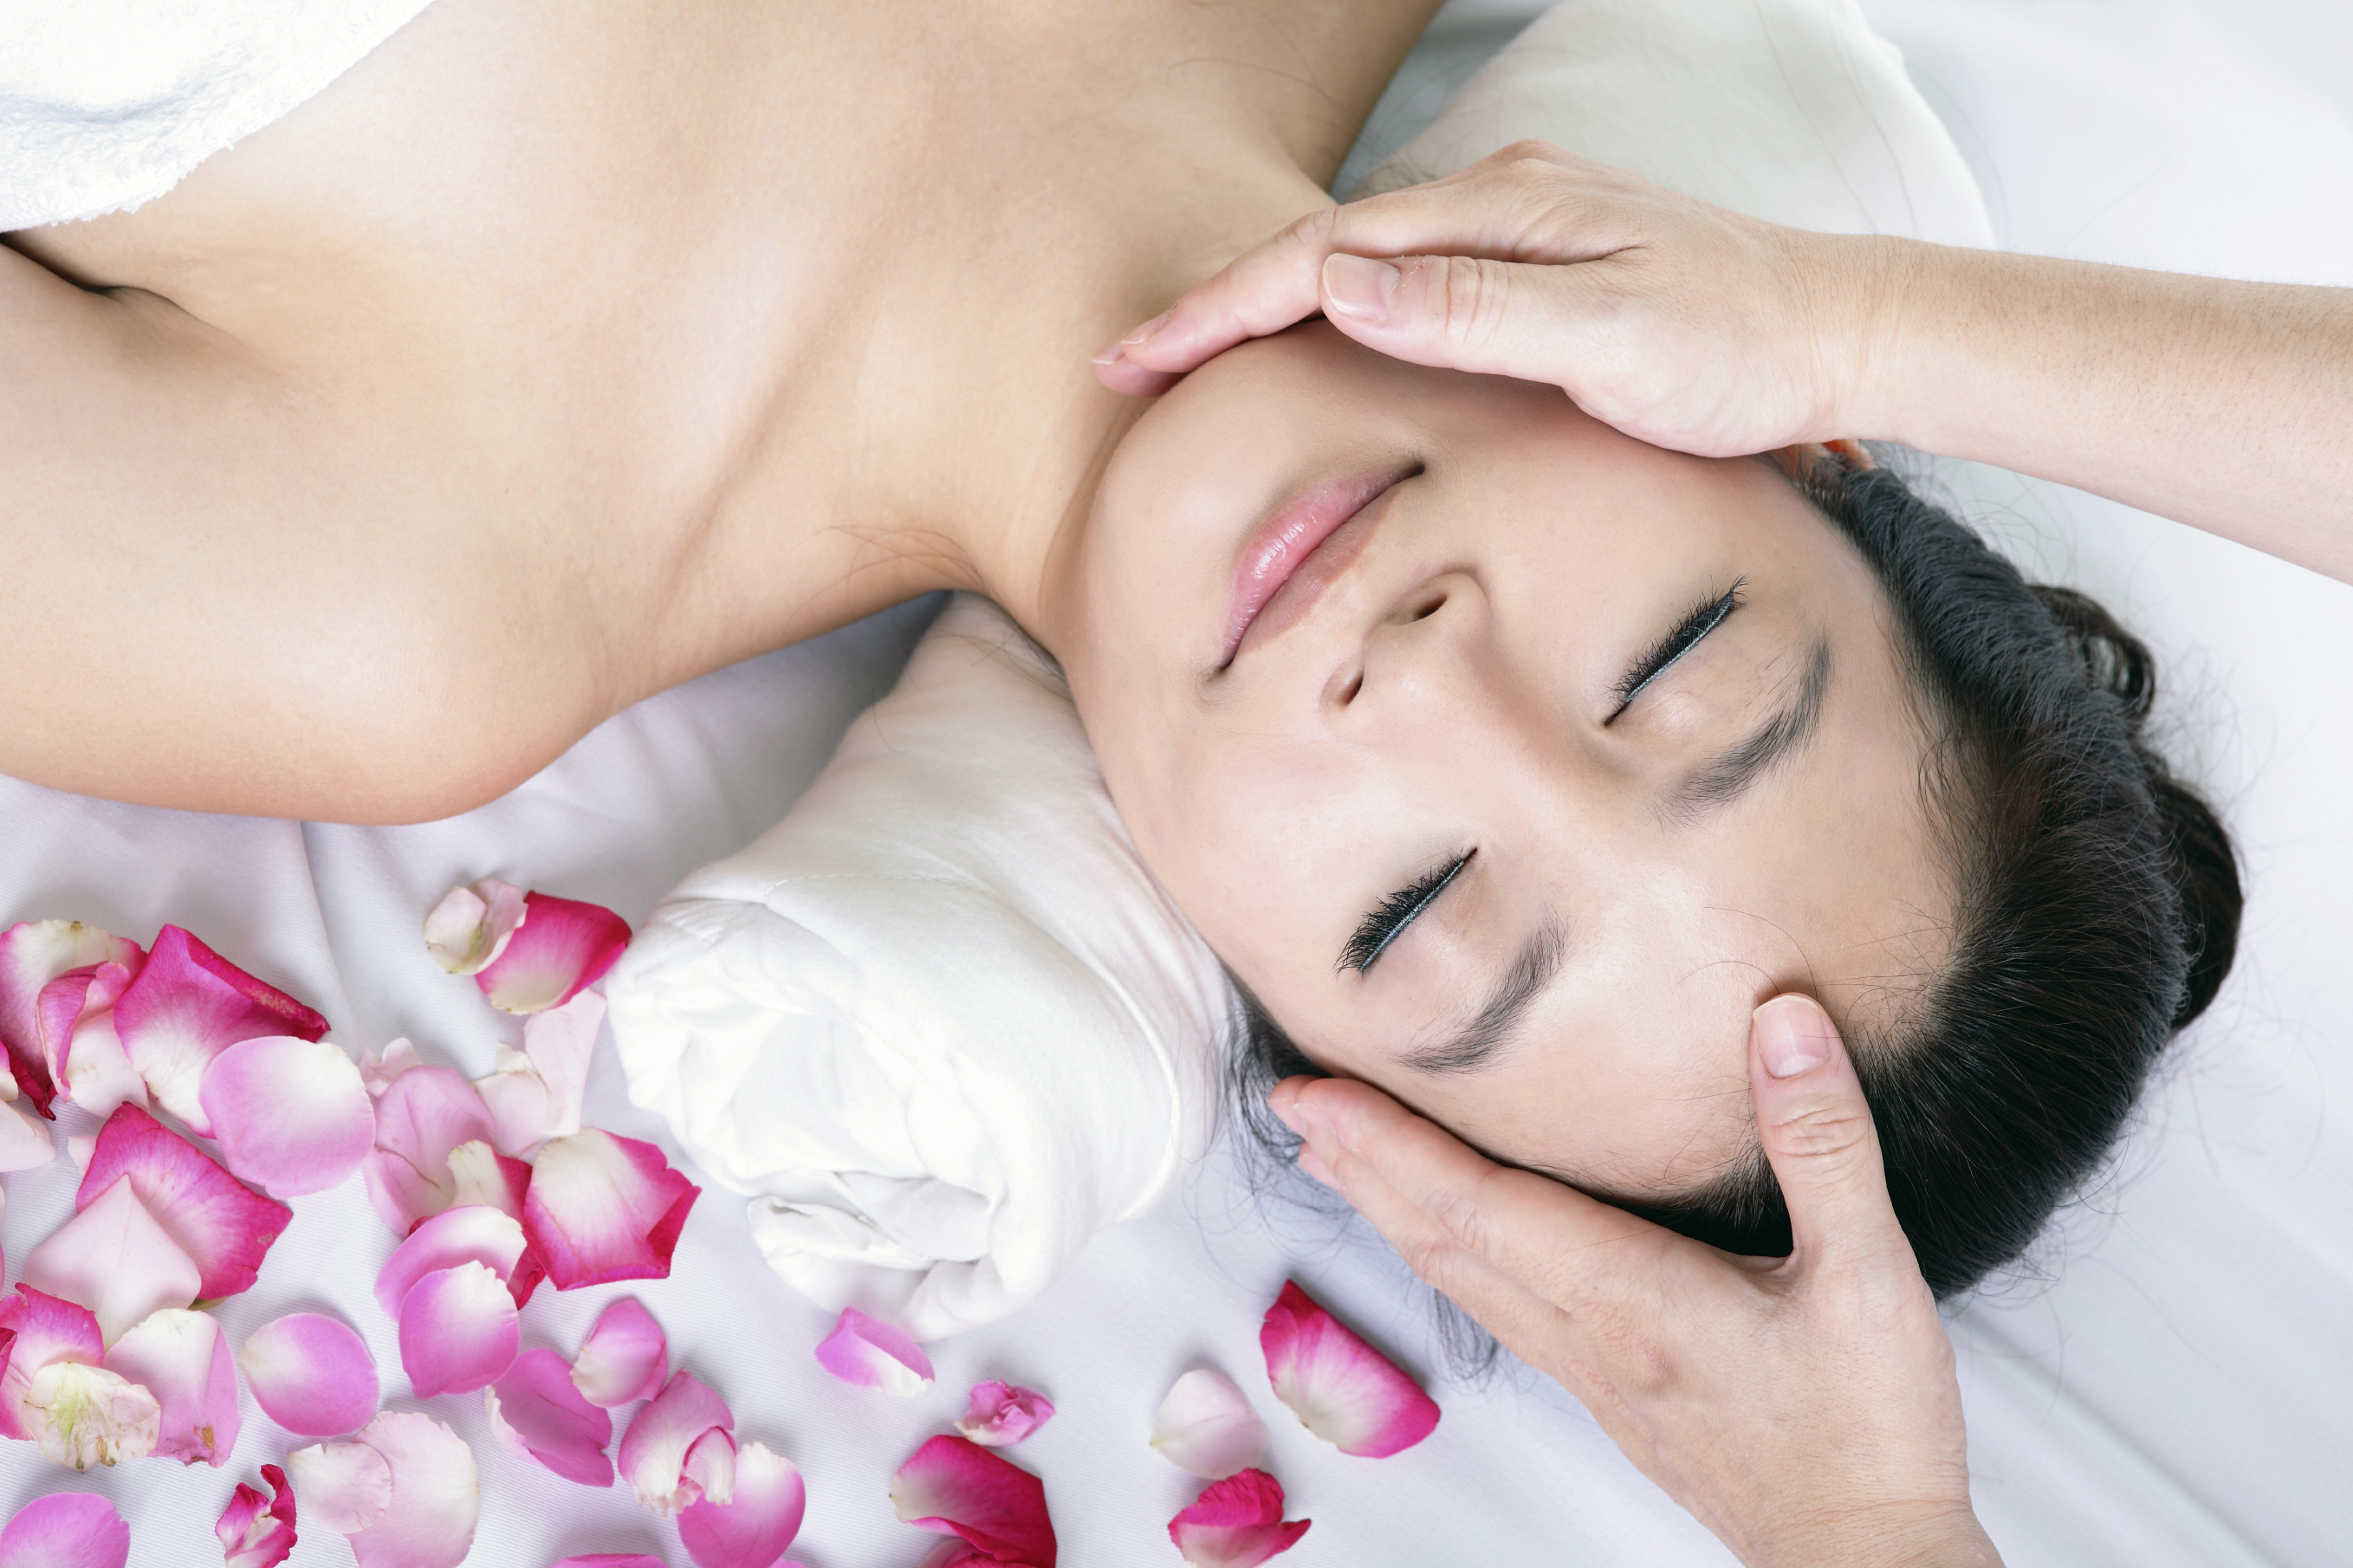 woman enjoy receiving face massage at spa with roses.